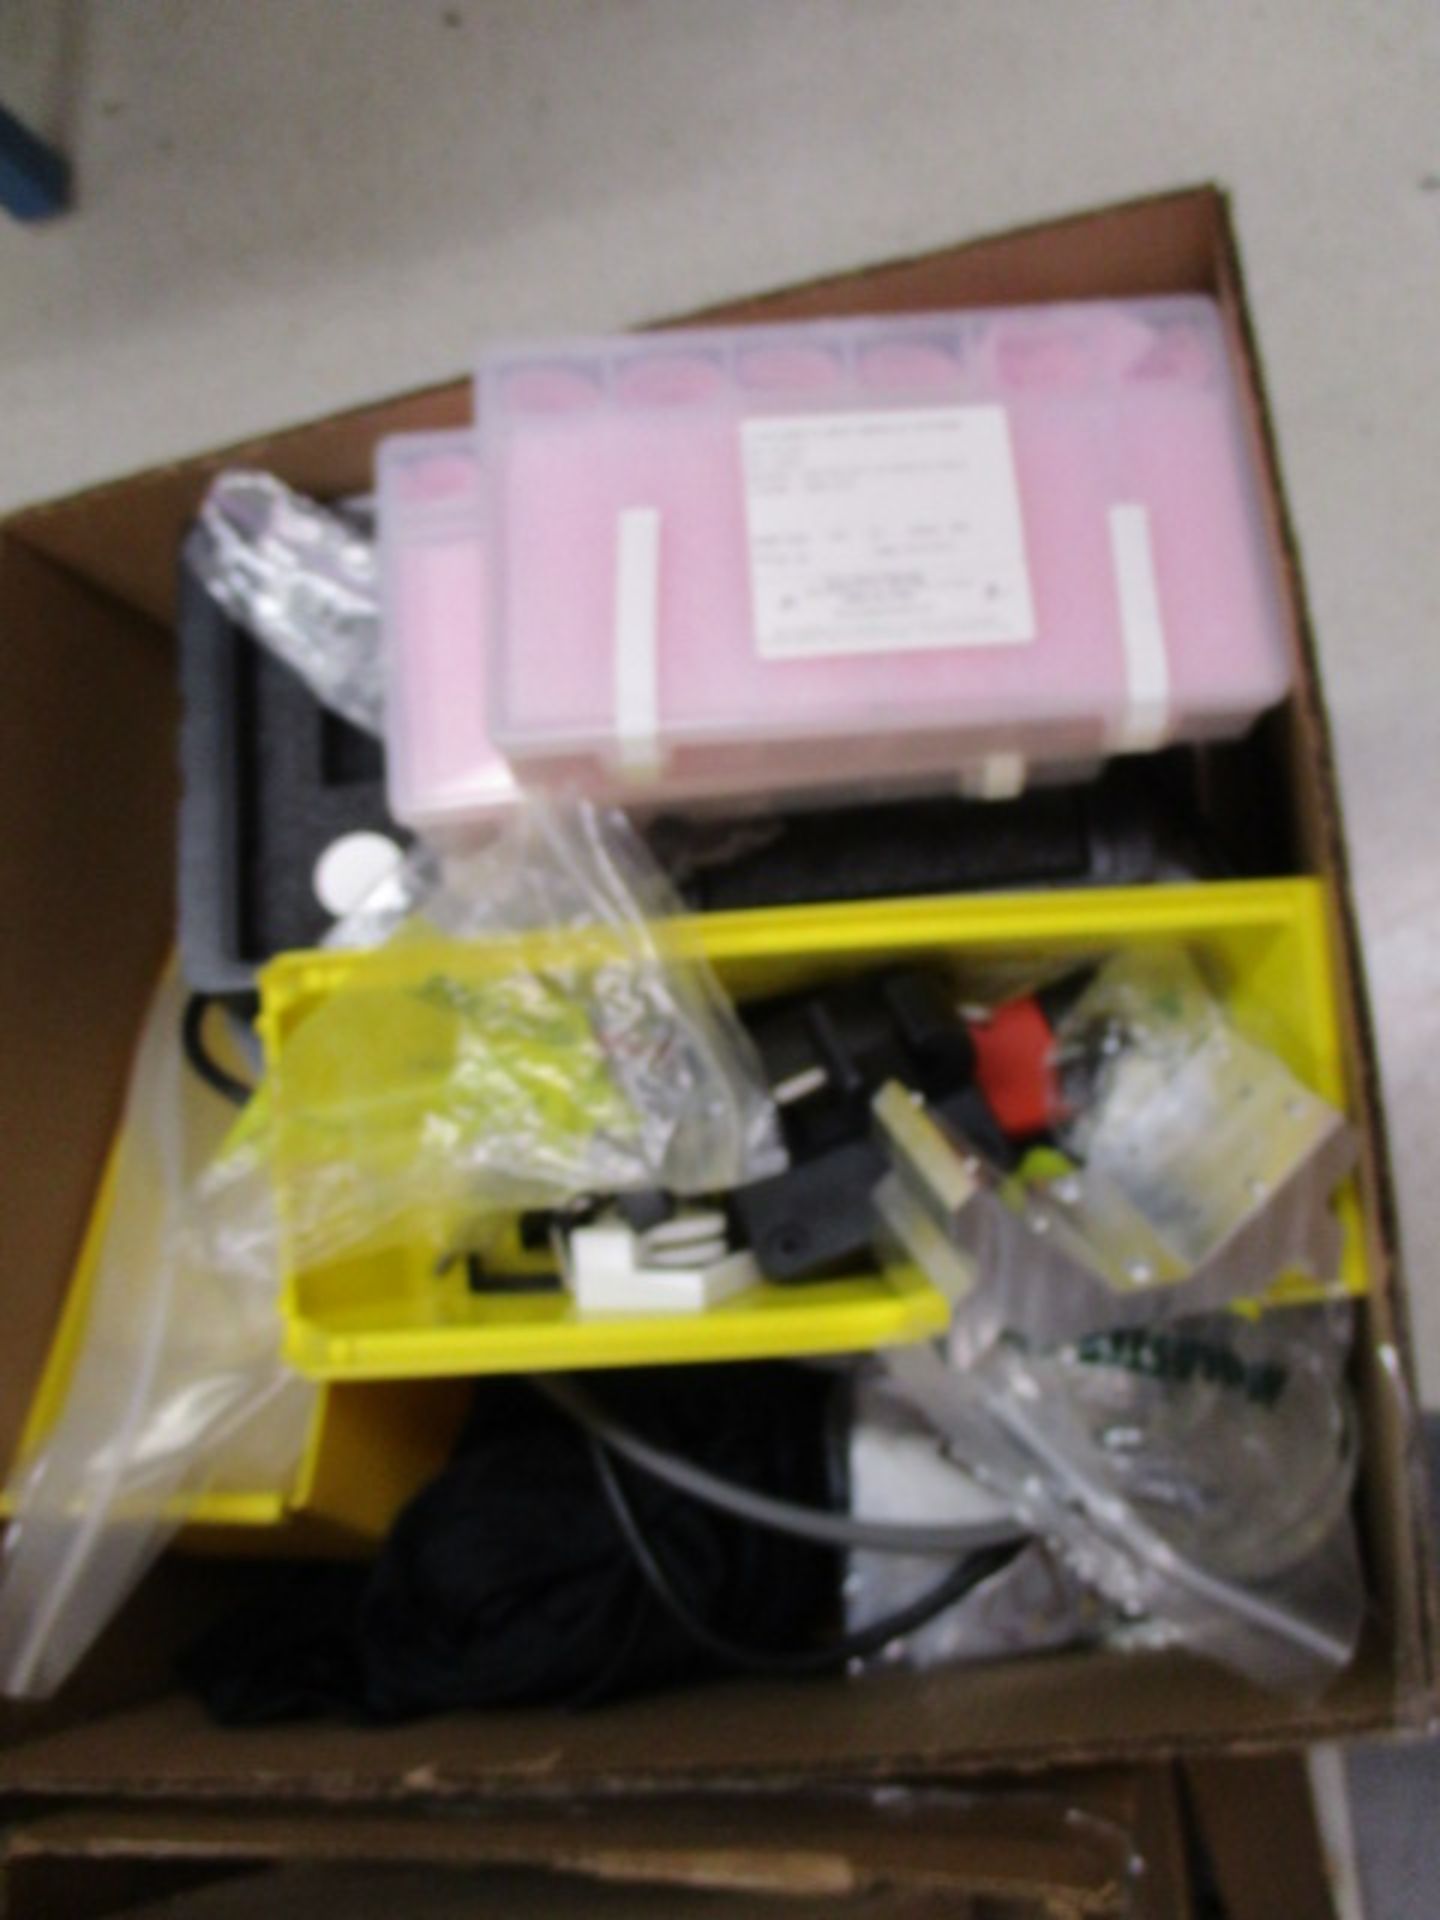 Lot: Miscellaneous Optical Assembly Framework Parts, Opto-Mechanical Parts, Hardware, Prisms, Akro - Image 5 of 5